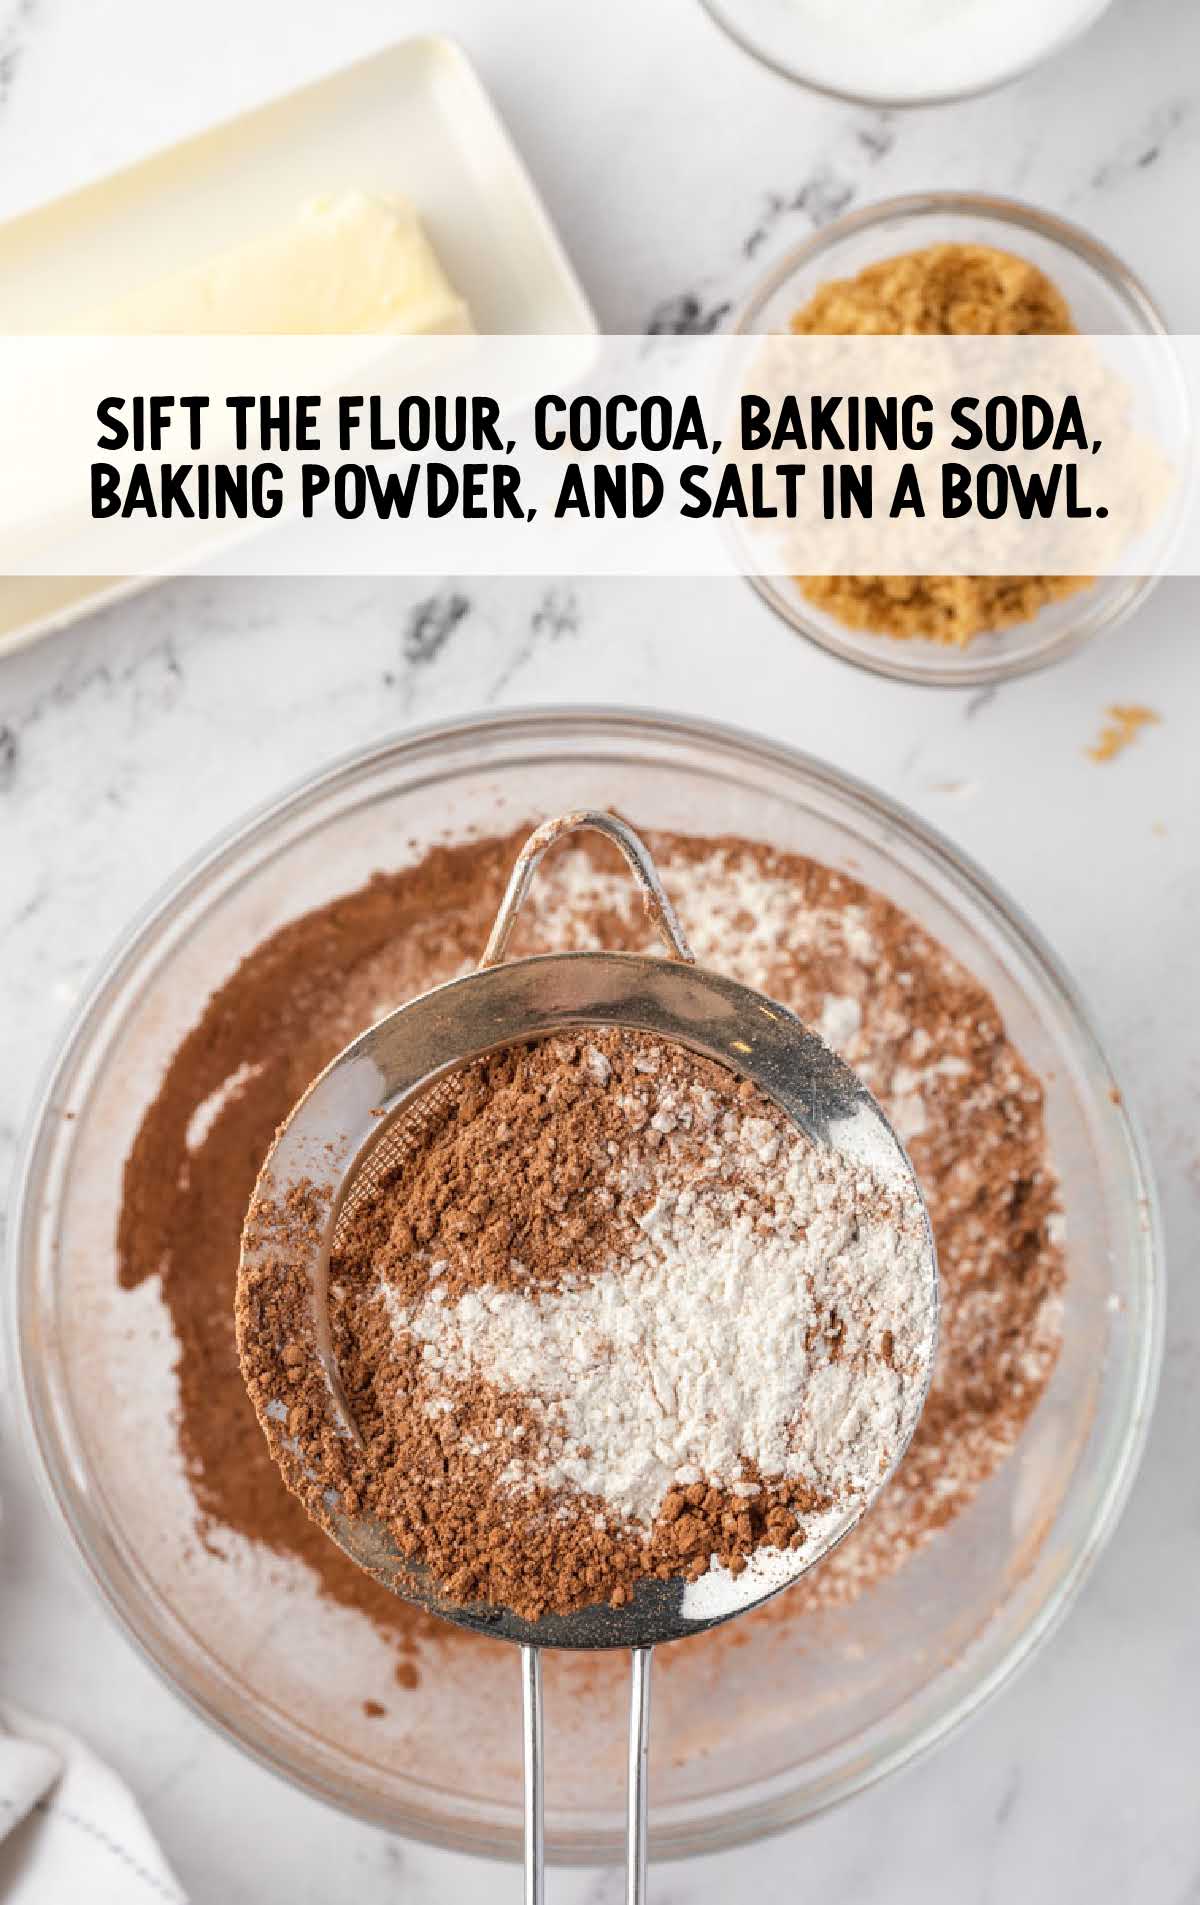 flour, cocoa, baking soda, baking powder, and salt combined in a bowl